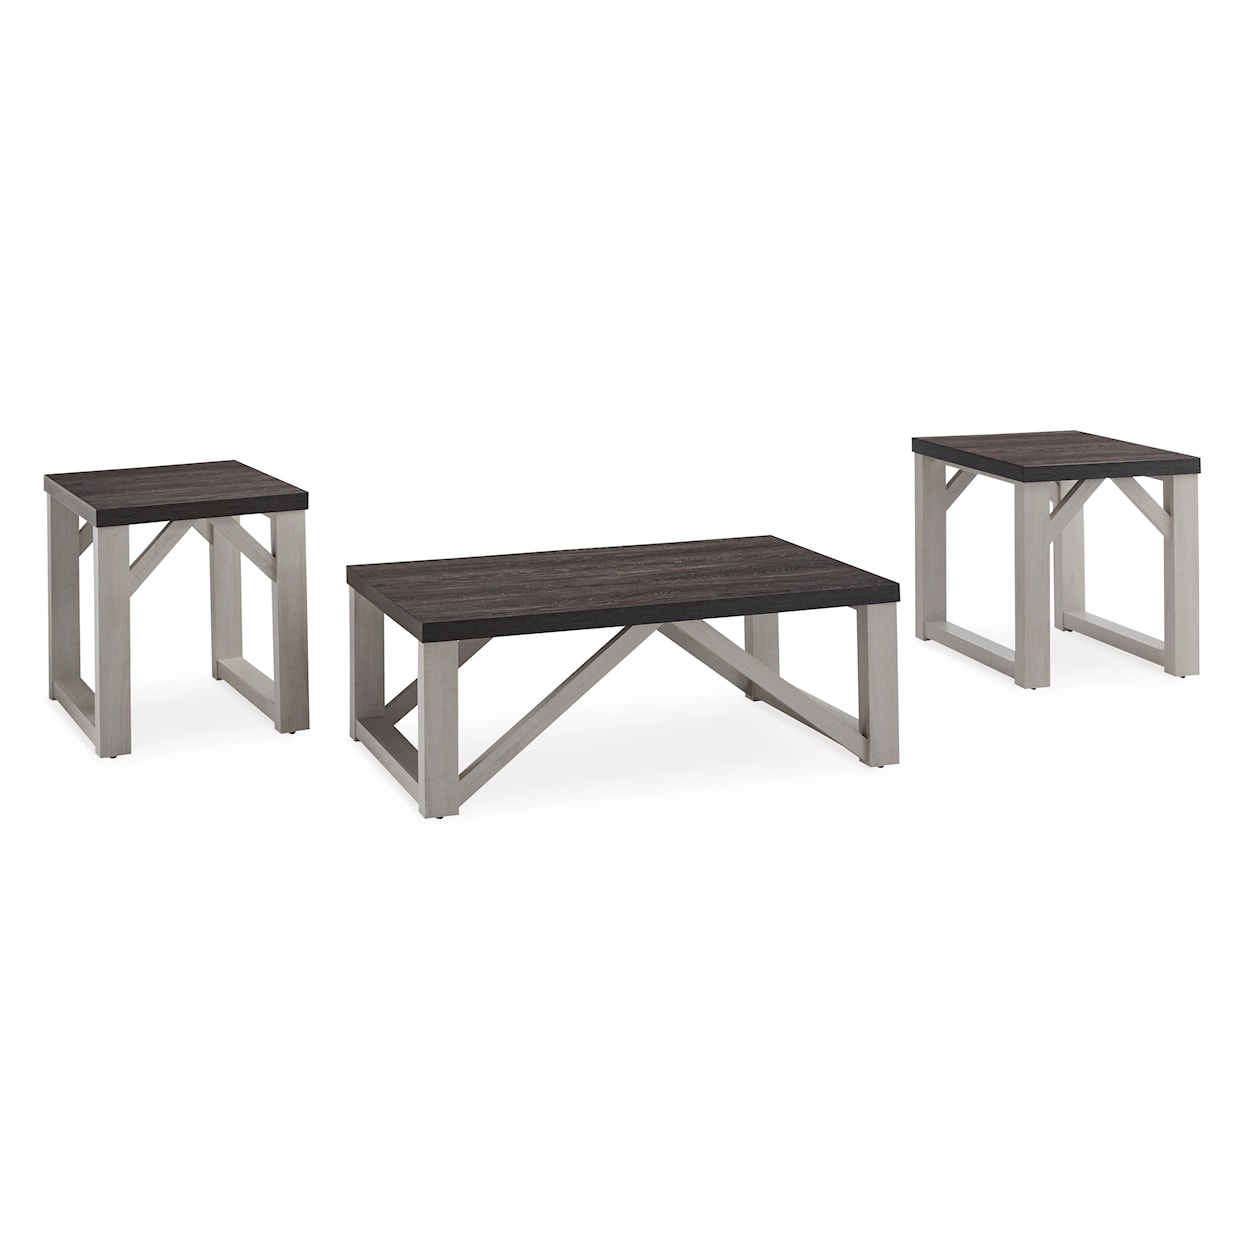 Signature Design by Ashley Dorrinson Occasional Table (Set of 3)